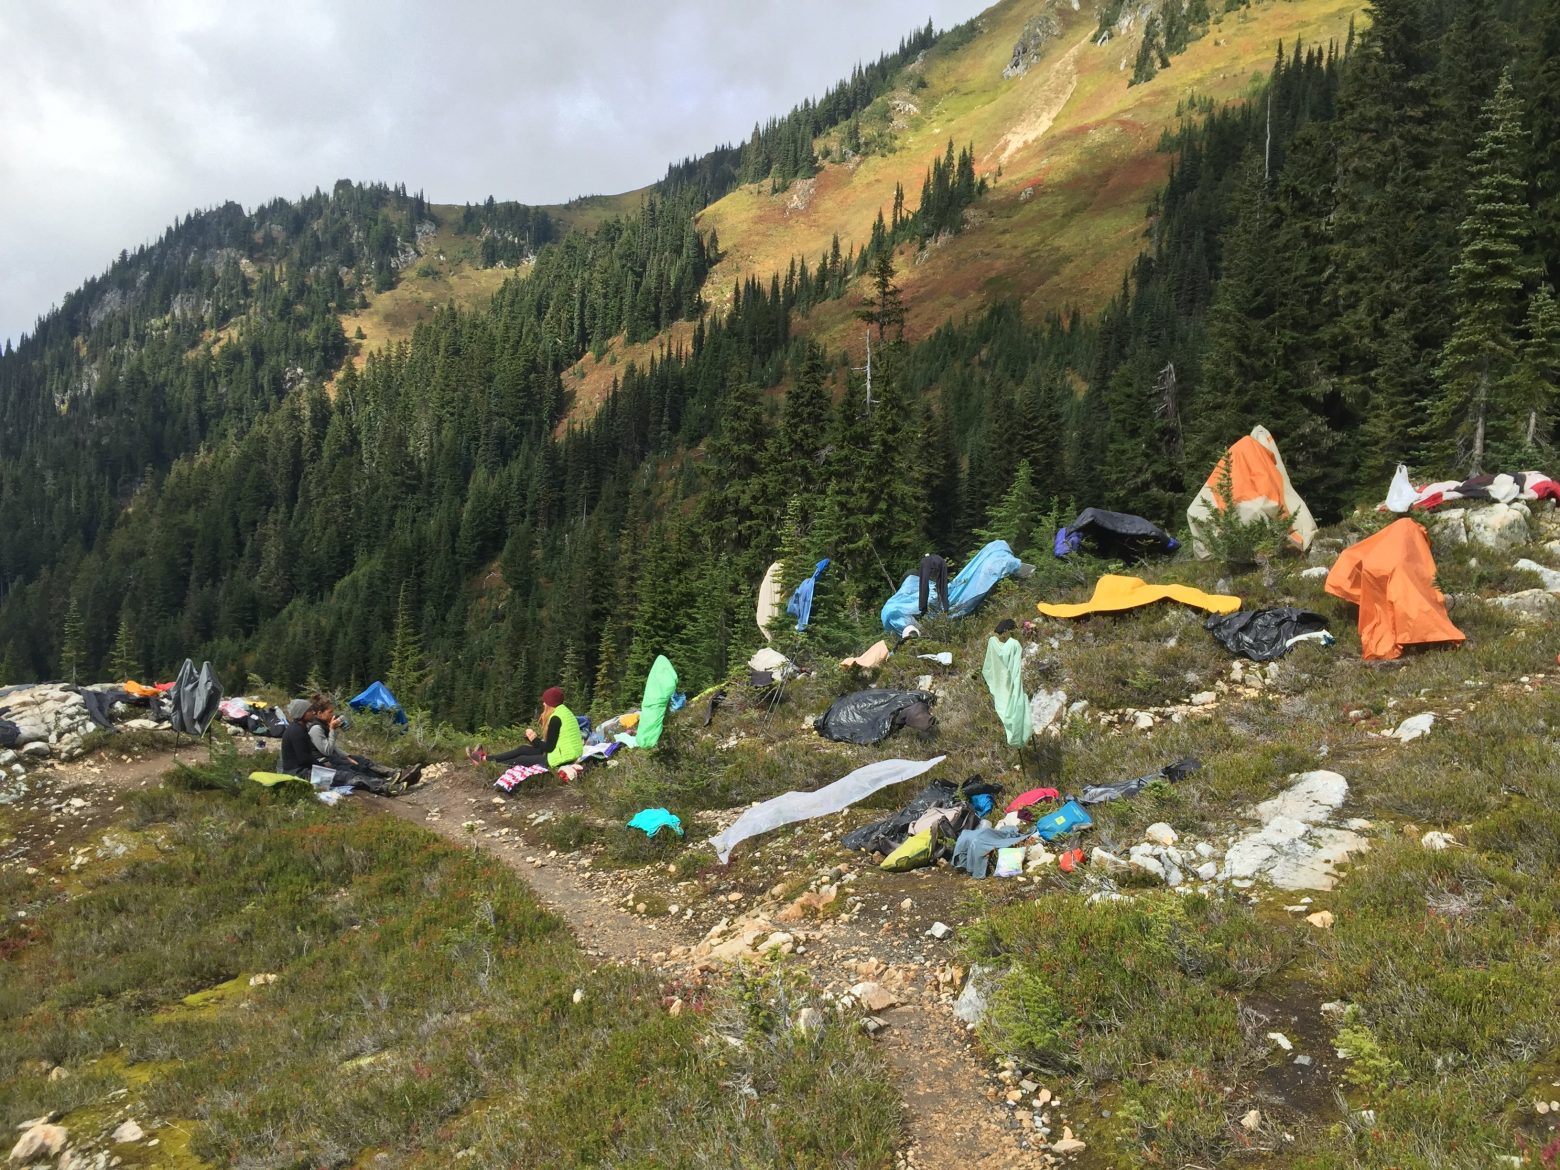 Gear spread out to dry all over next to the PCT